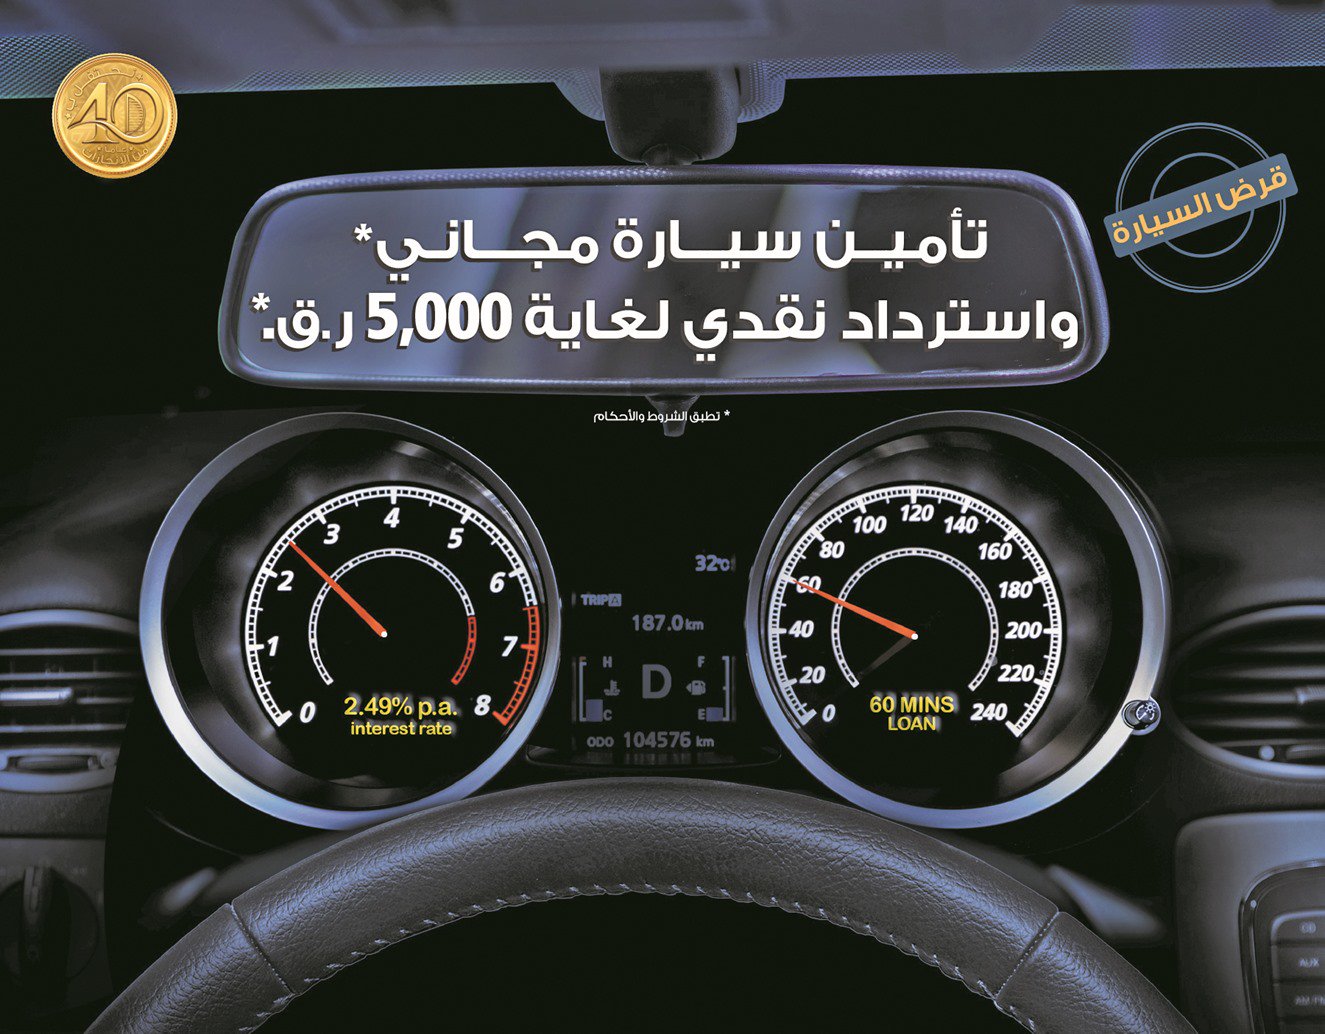 Doha Bank launches car loan bundled offer